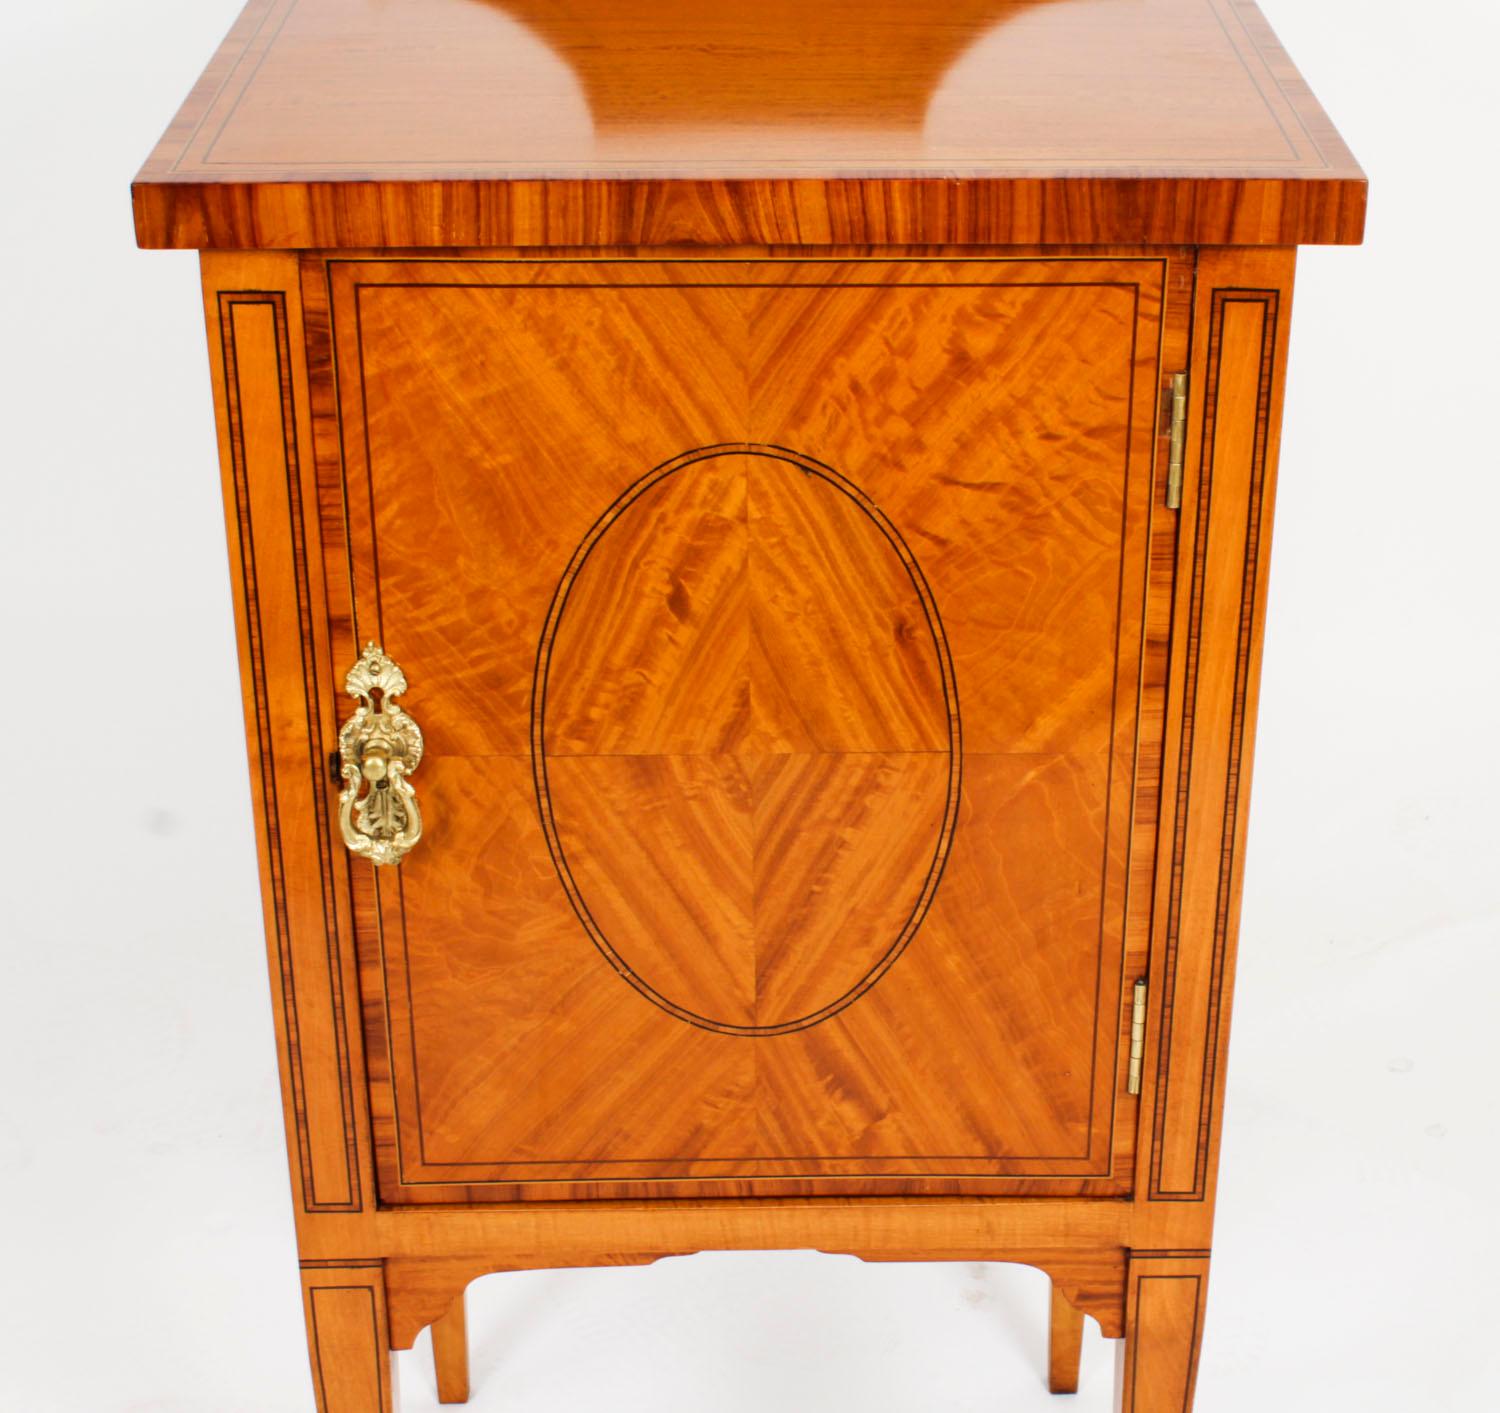 Late 19th Century Antique Inlaid Satinwood Bedside Cabinet c.1880 19th Century